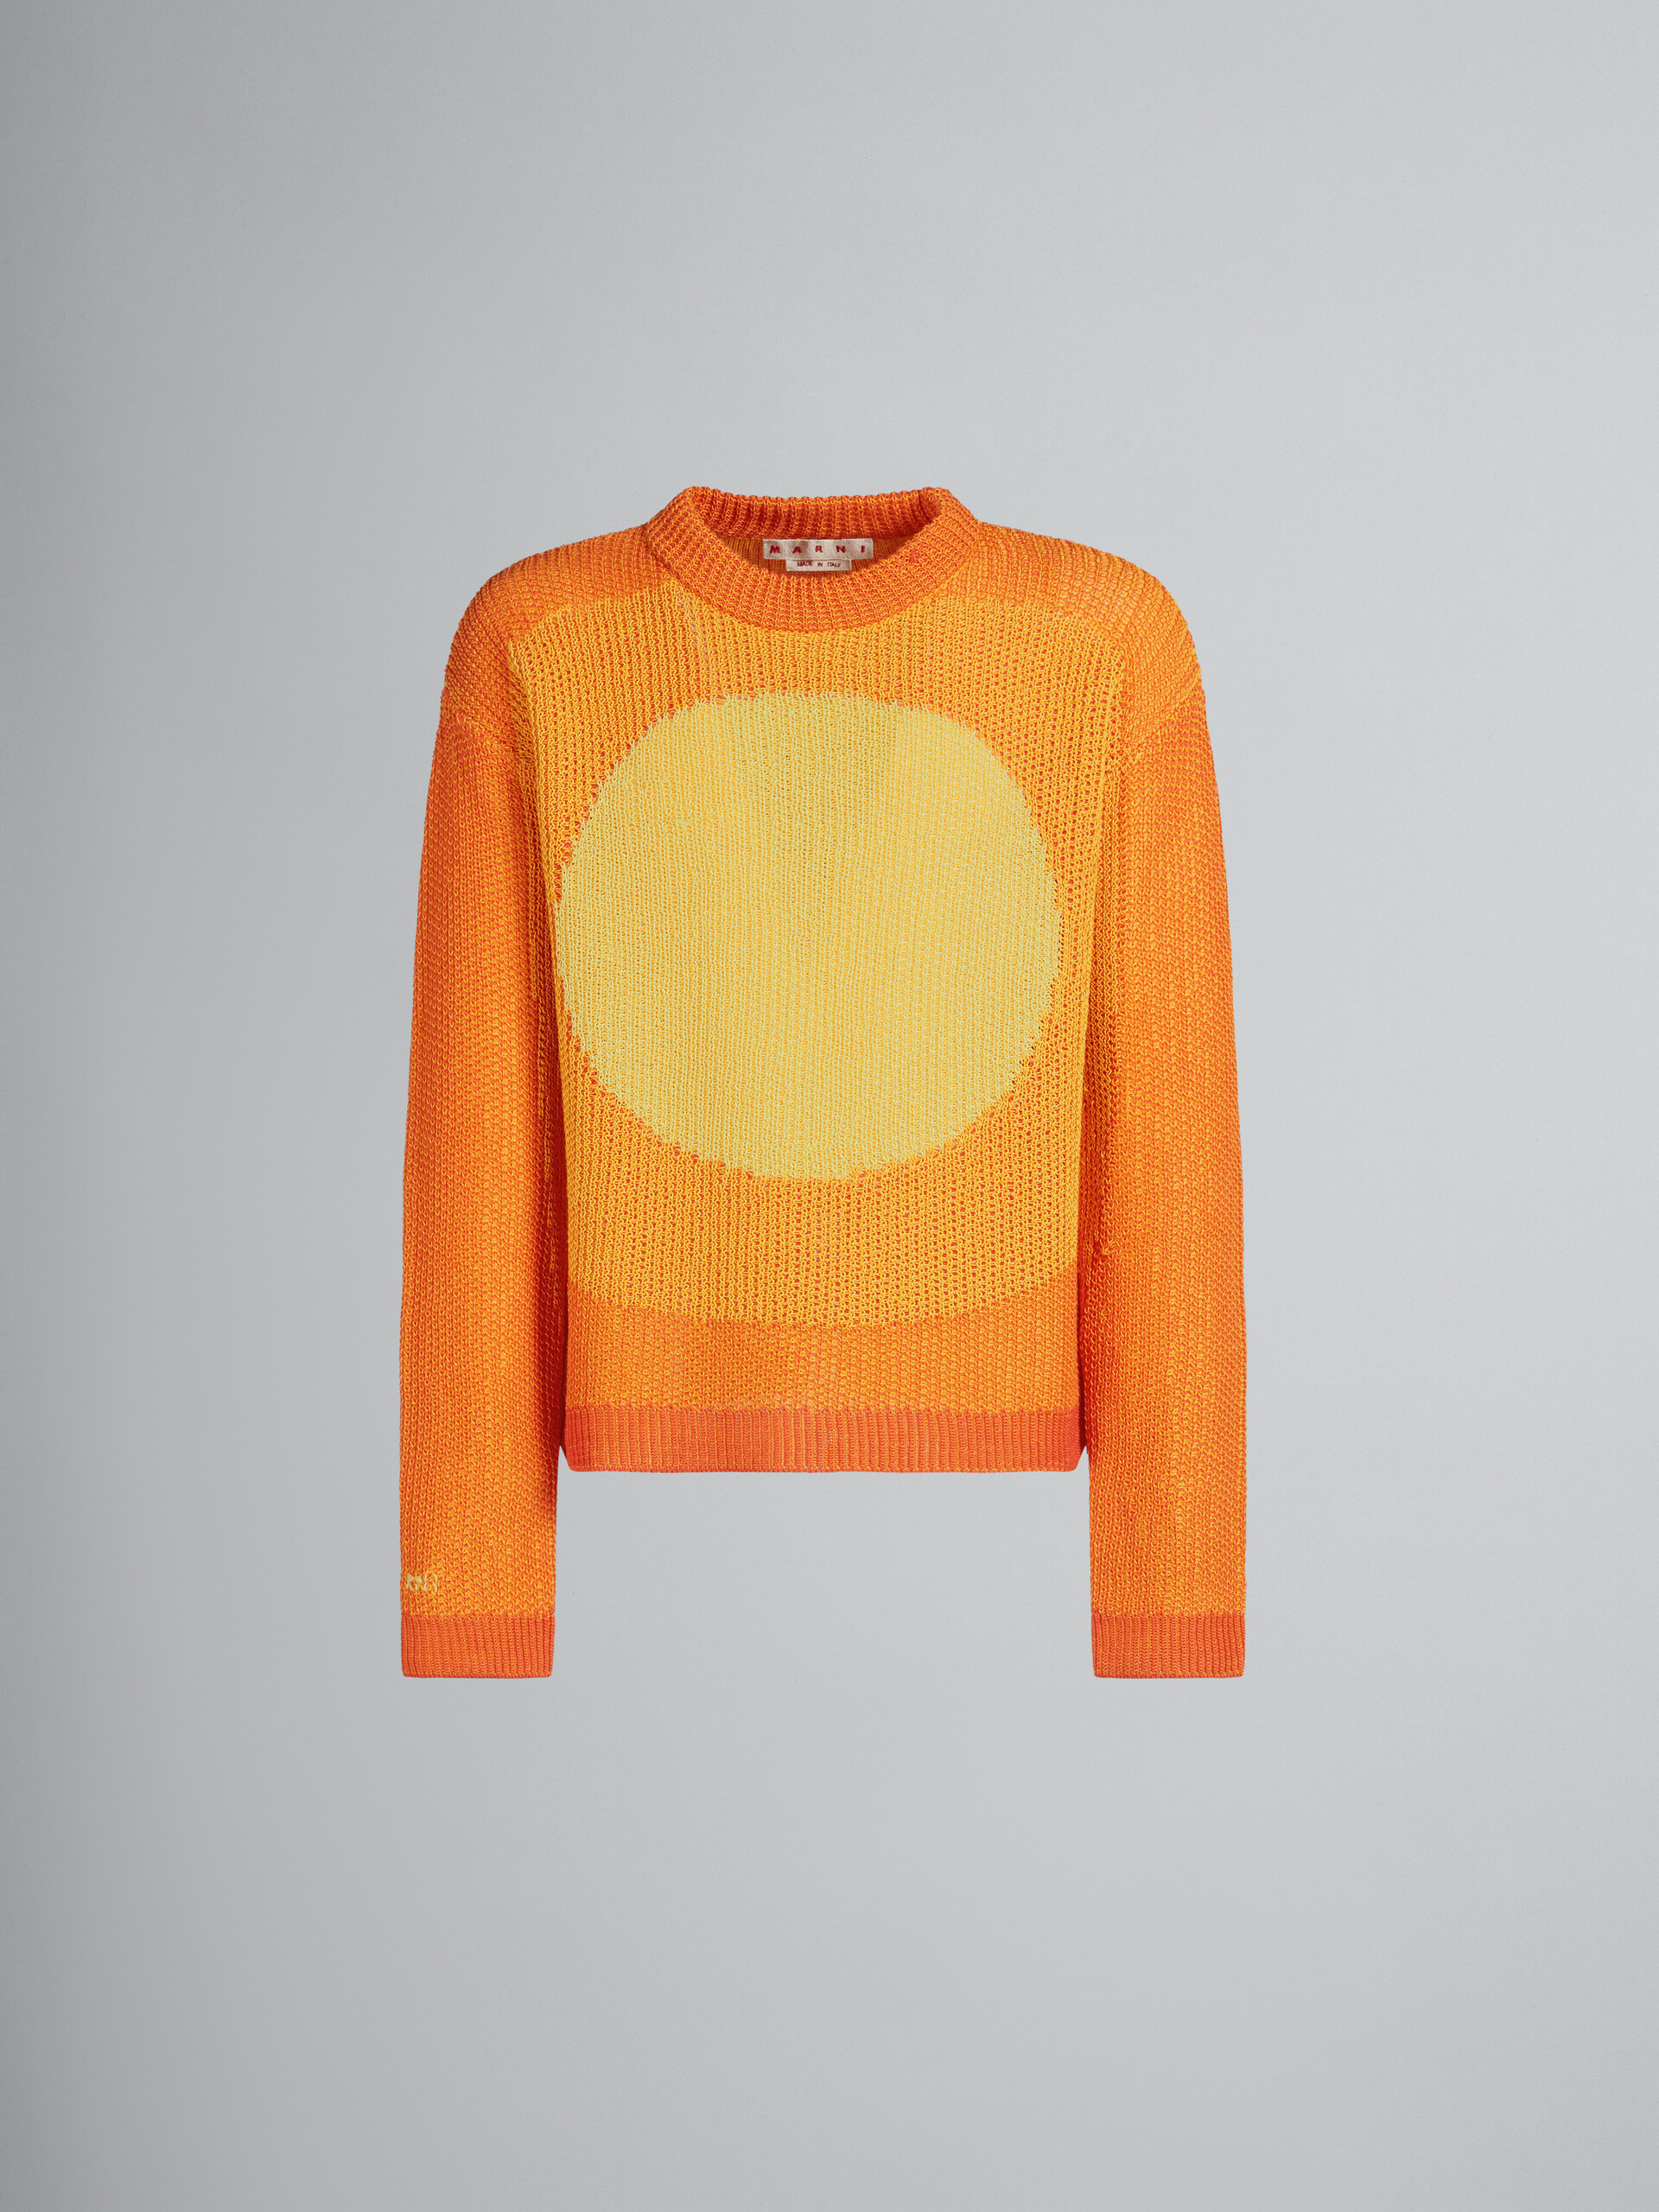 Orange jumper with circle inlay - Pullovers - Image 1